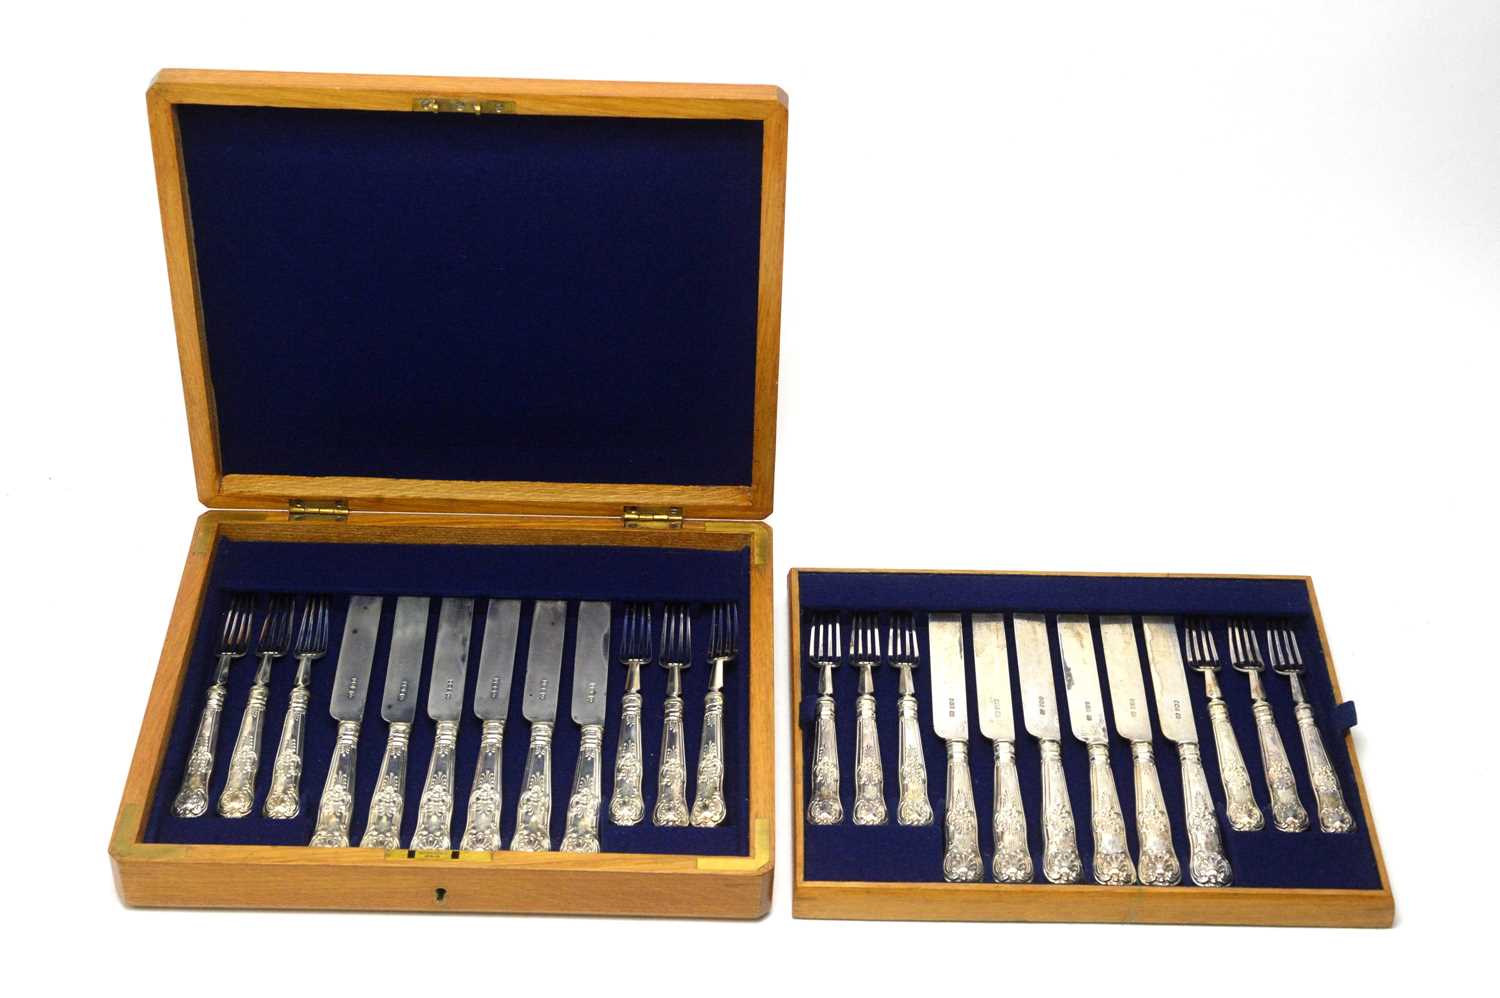 Lot 599 - A set of twelve Victorian silver fruit knives and forks, by Hamilton & Inches